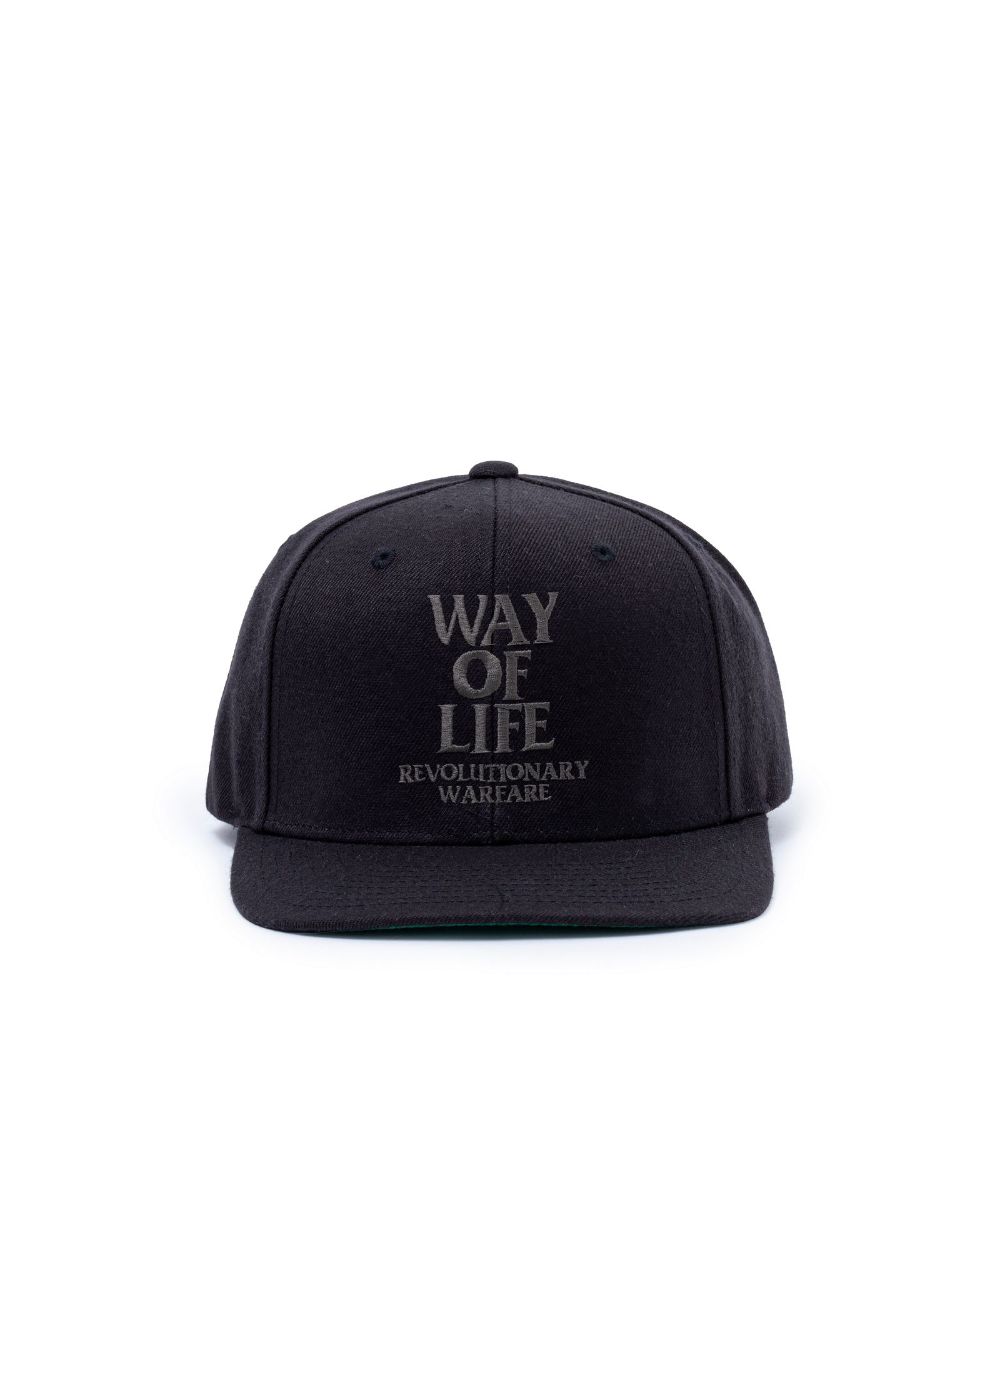 RATS　EMBROIDERY CAP　WAY OF LIFE